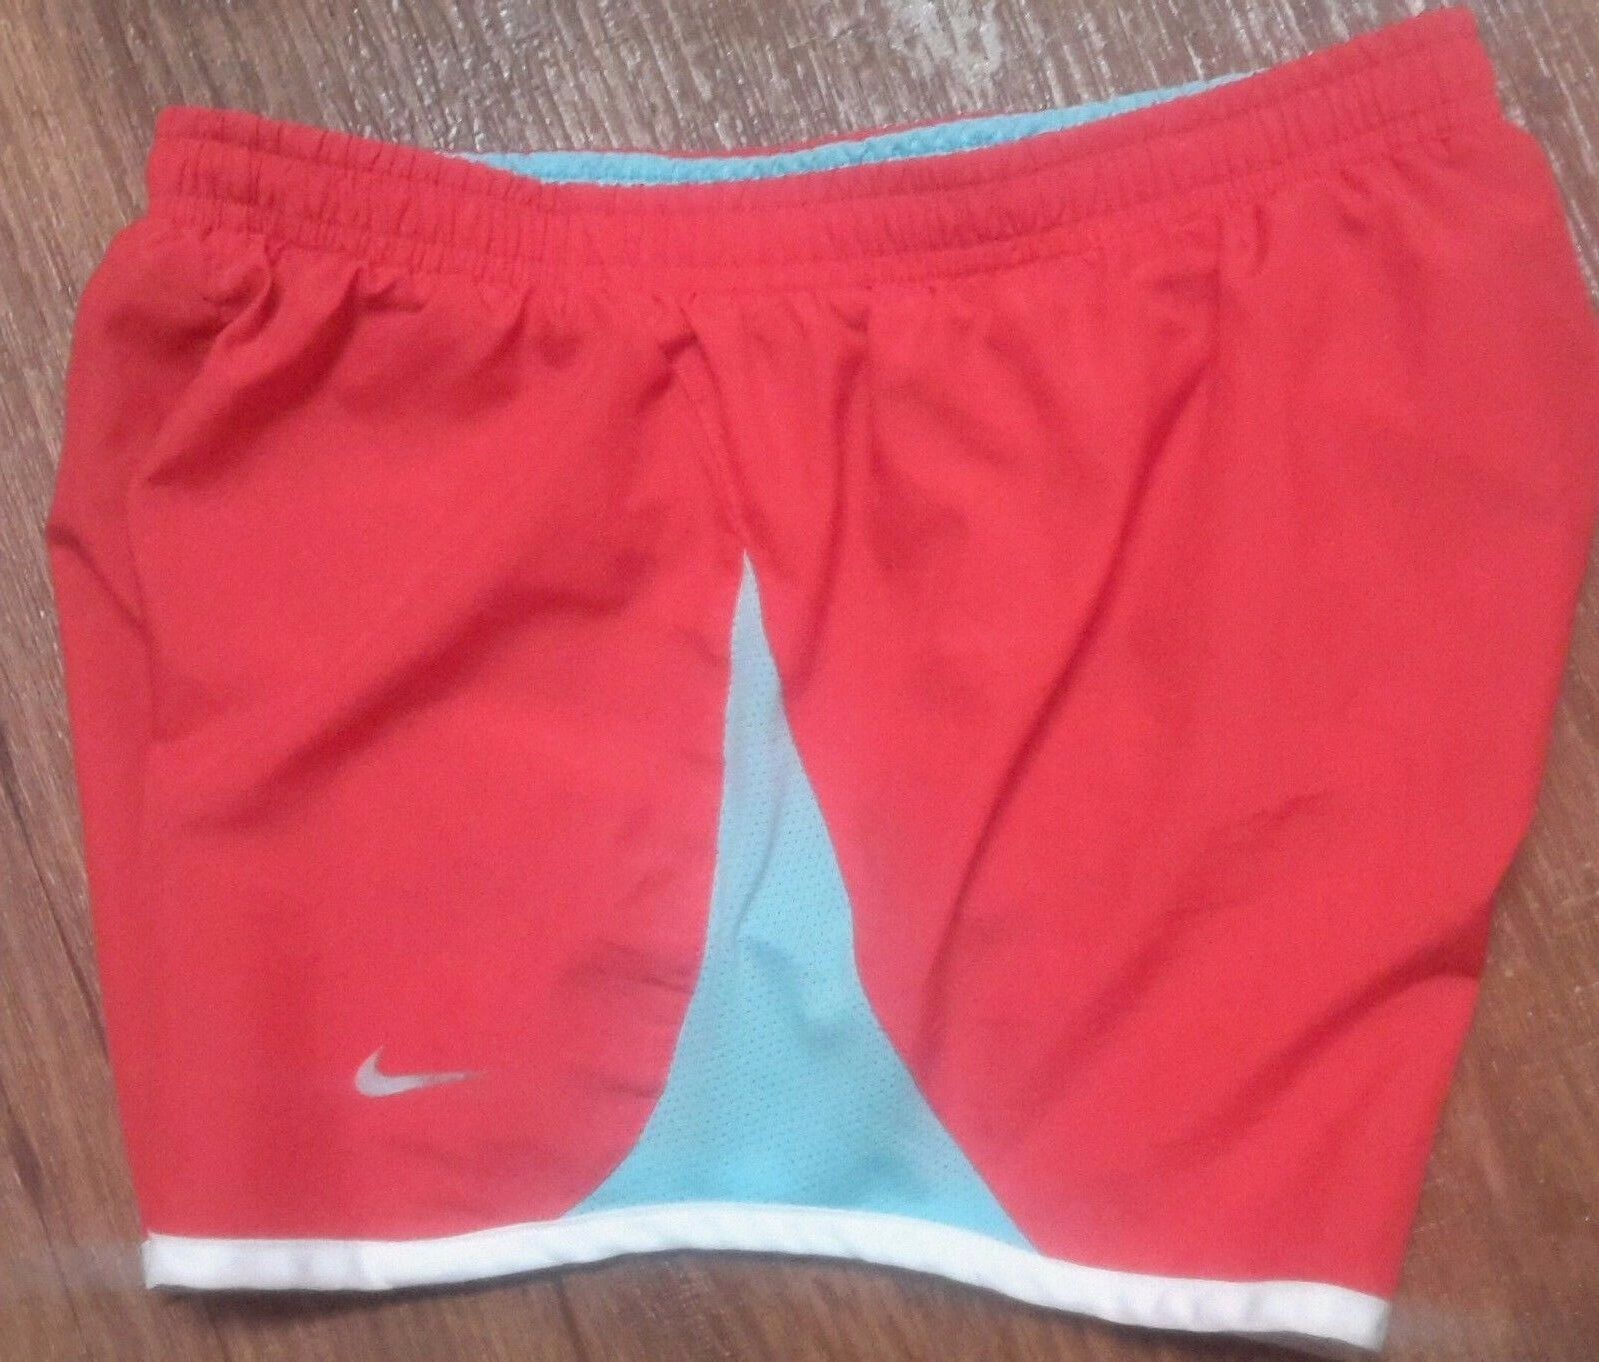 Nike Fit Dry 5k Tempo Running Shorts Red Blue Athletic Workout Xs Xsmall 573728